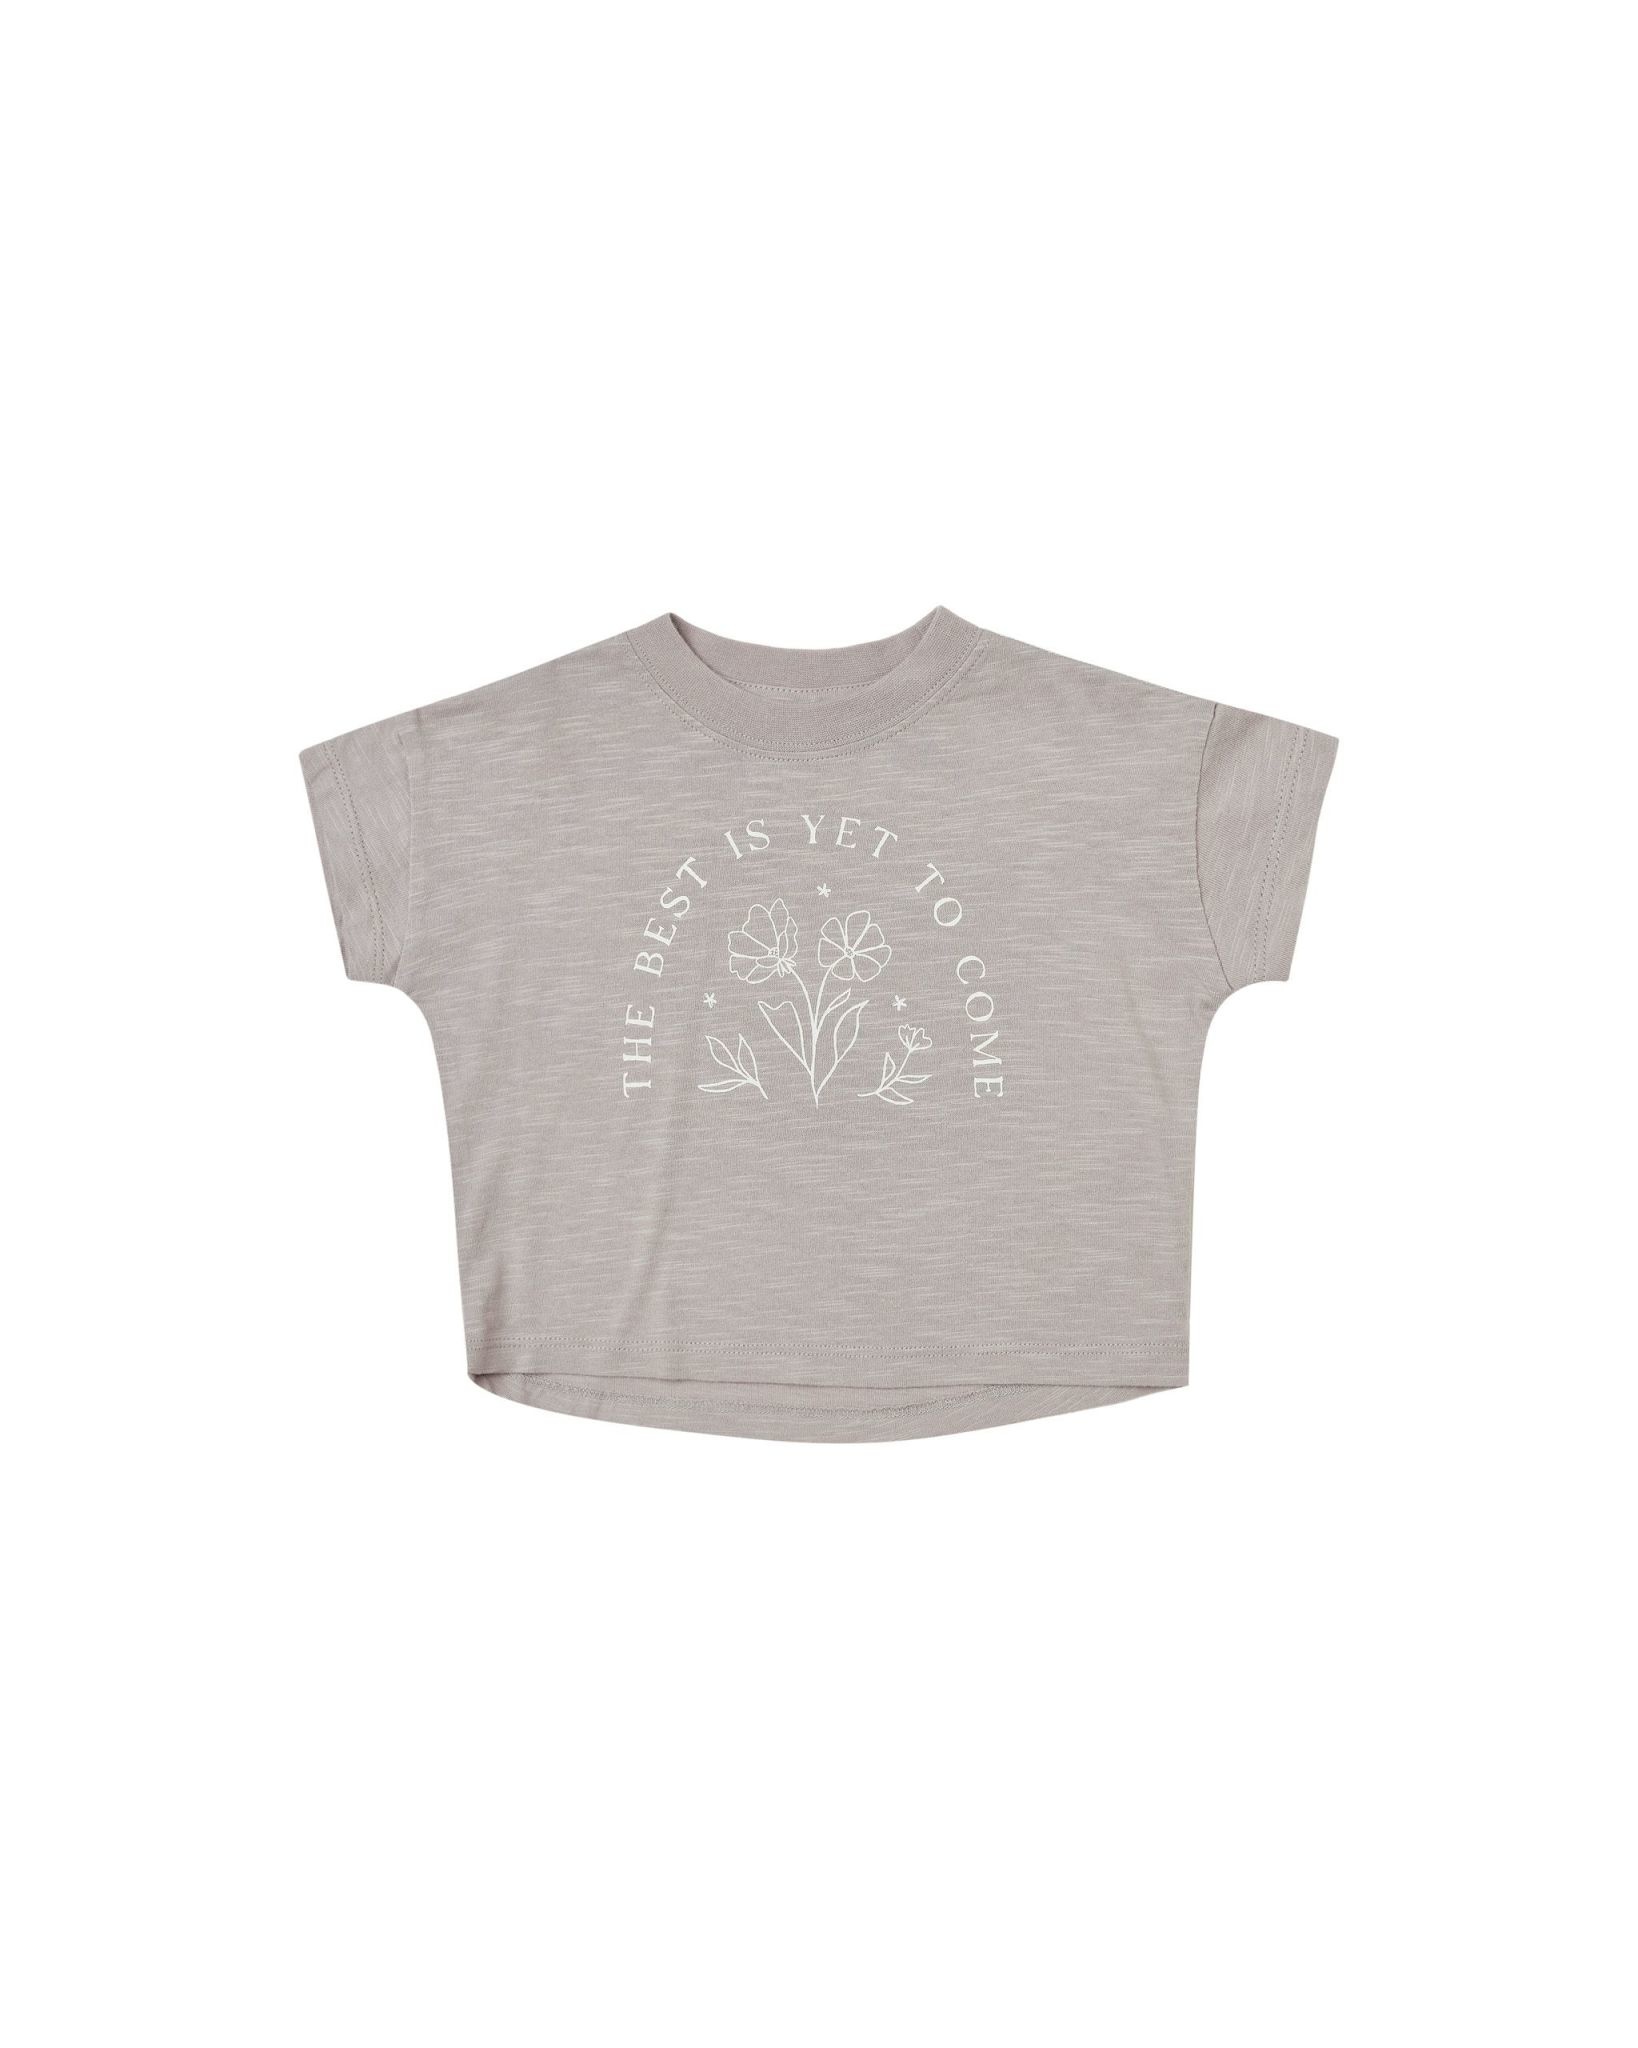 Rylee and Cru Rylee & Cru The Best Is Yet To Come Boxy Tee